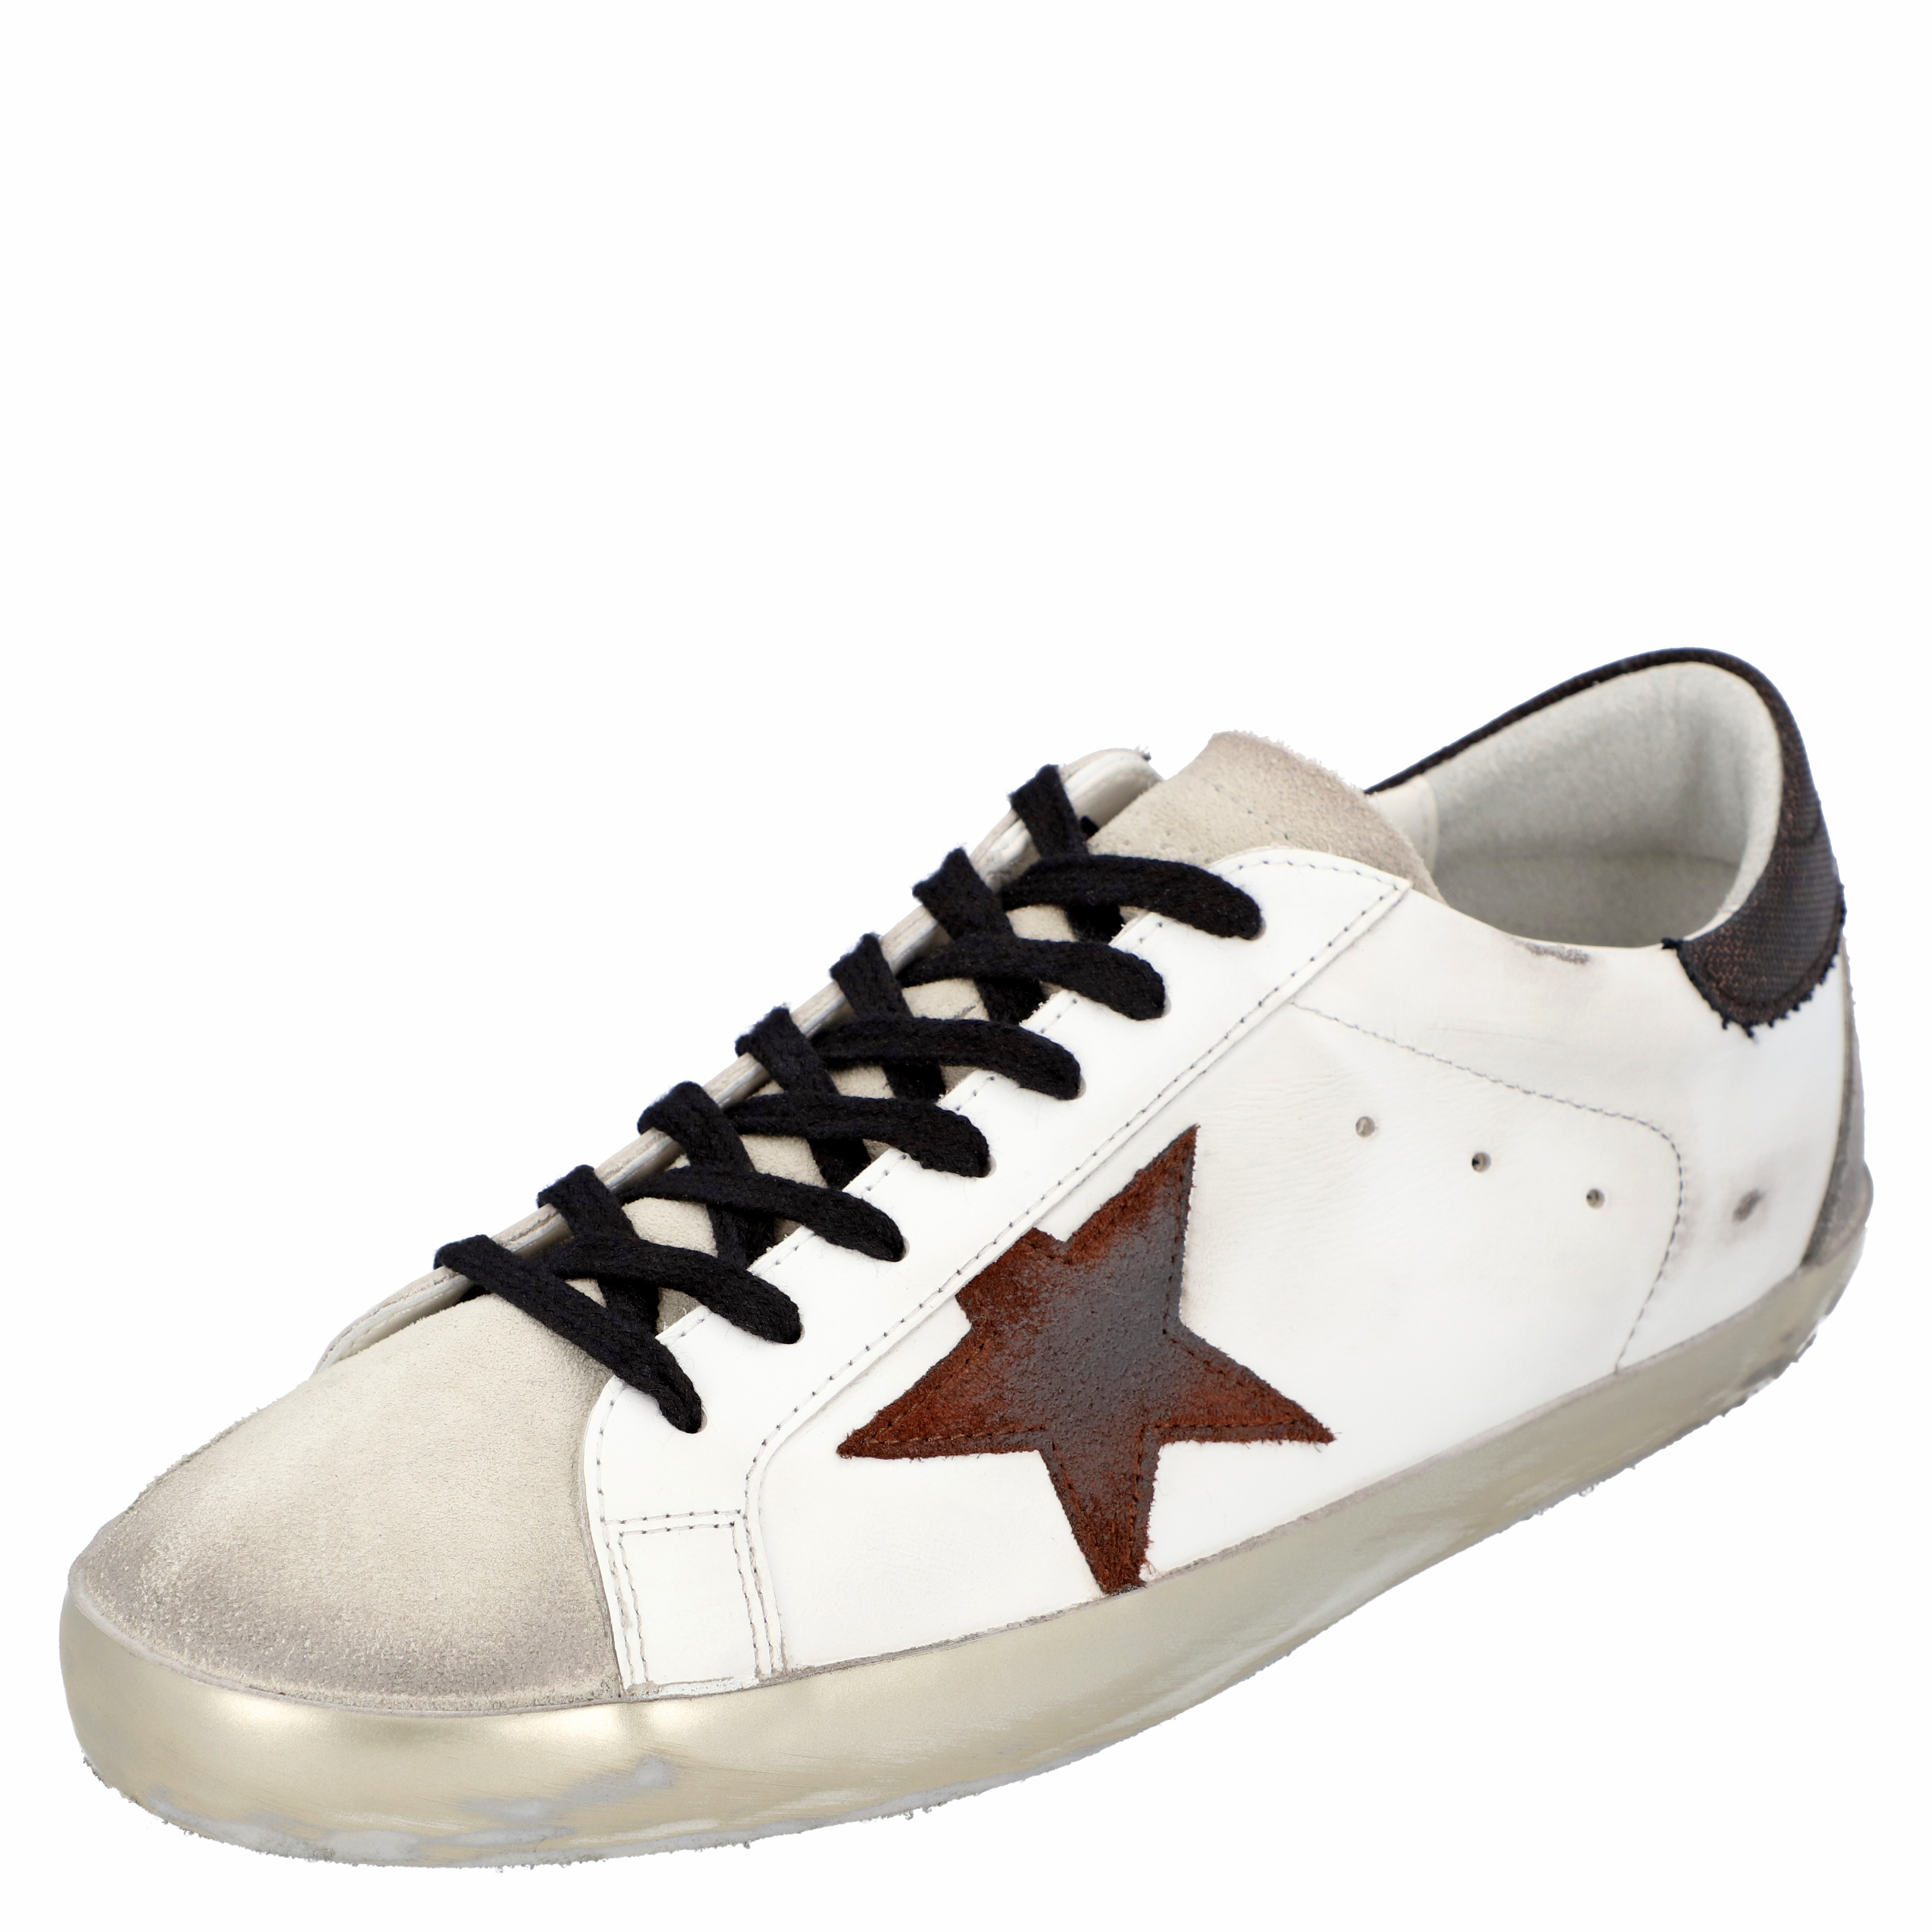 Golden Goose White/Black/Red Leather Superstar Sneakers Size EU 42